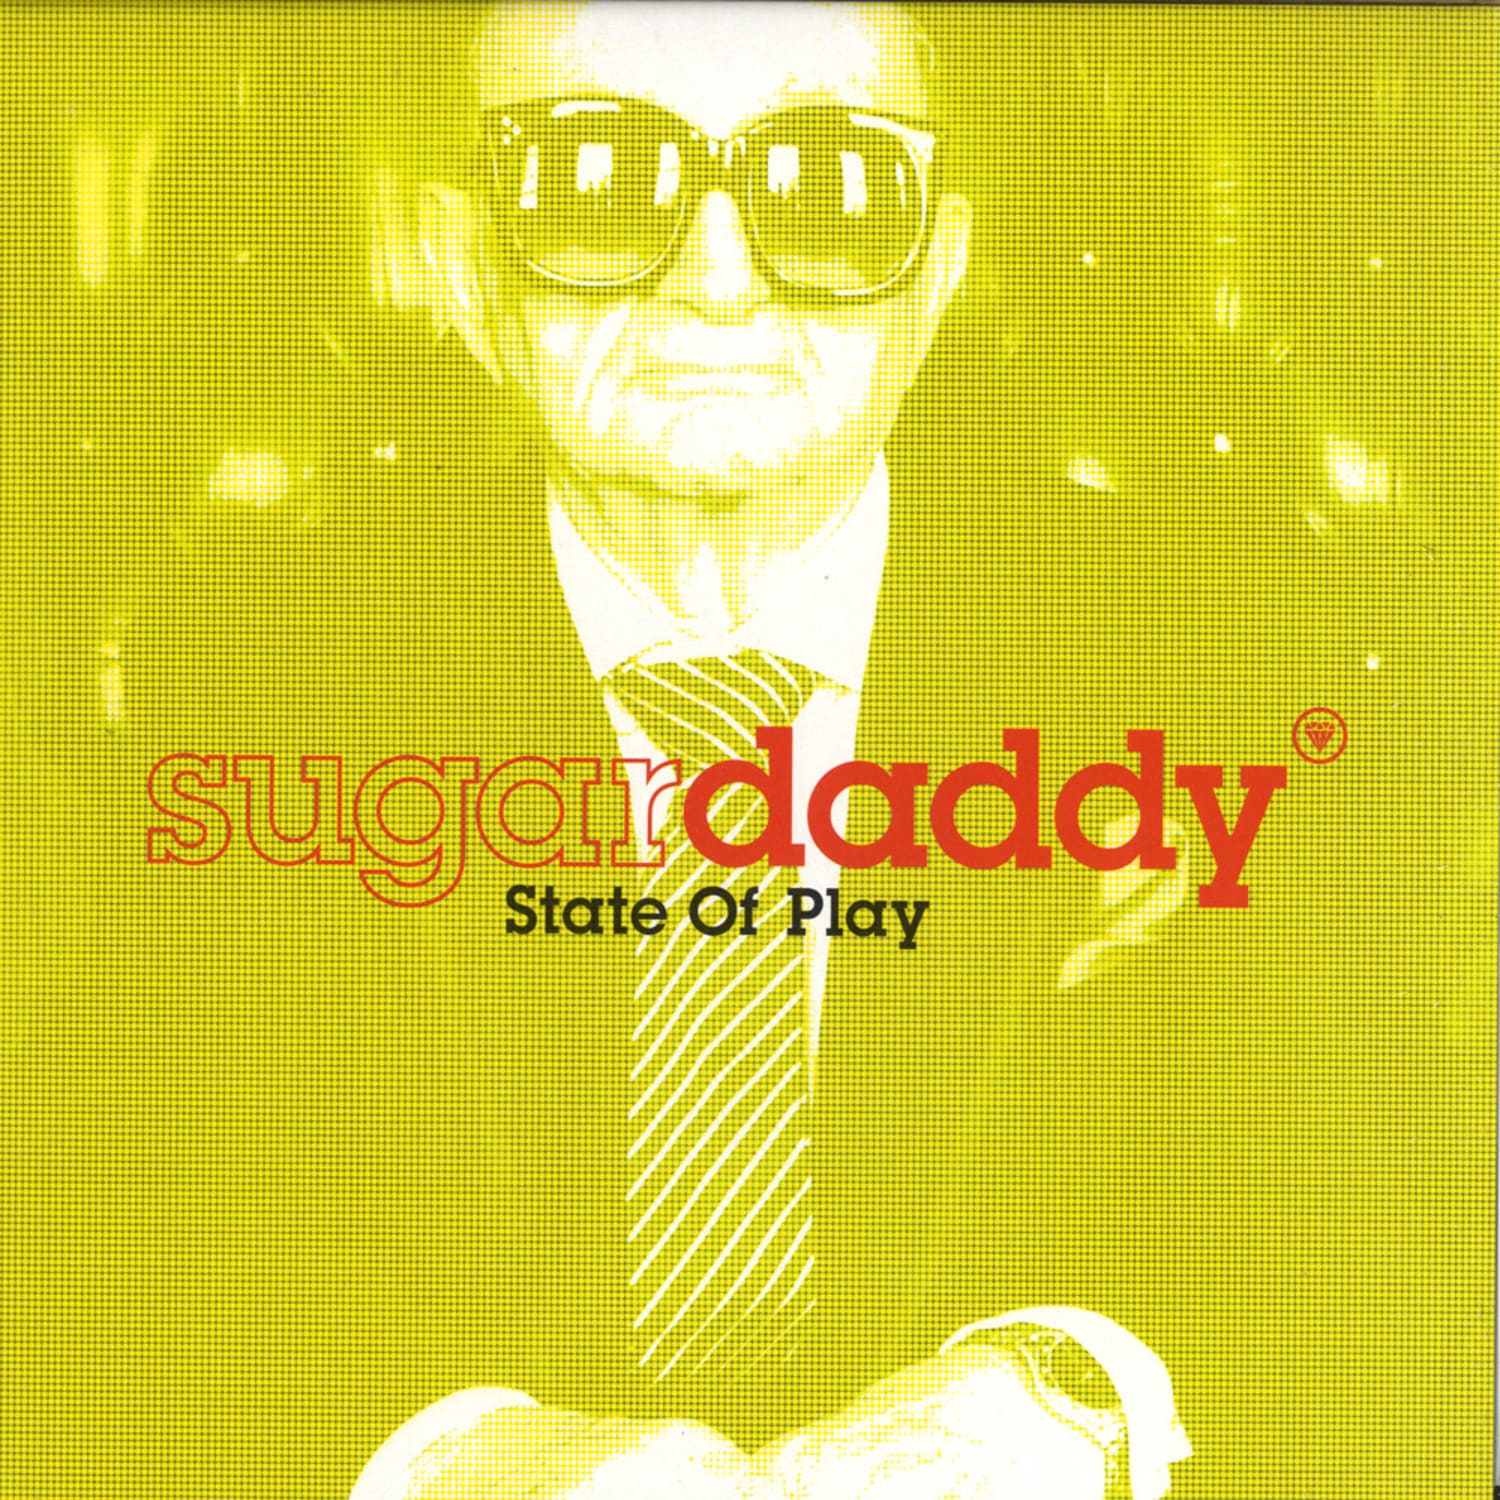 Sugardaddy - STATE OF PLAY